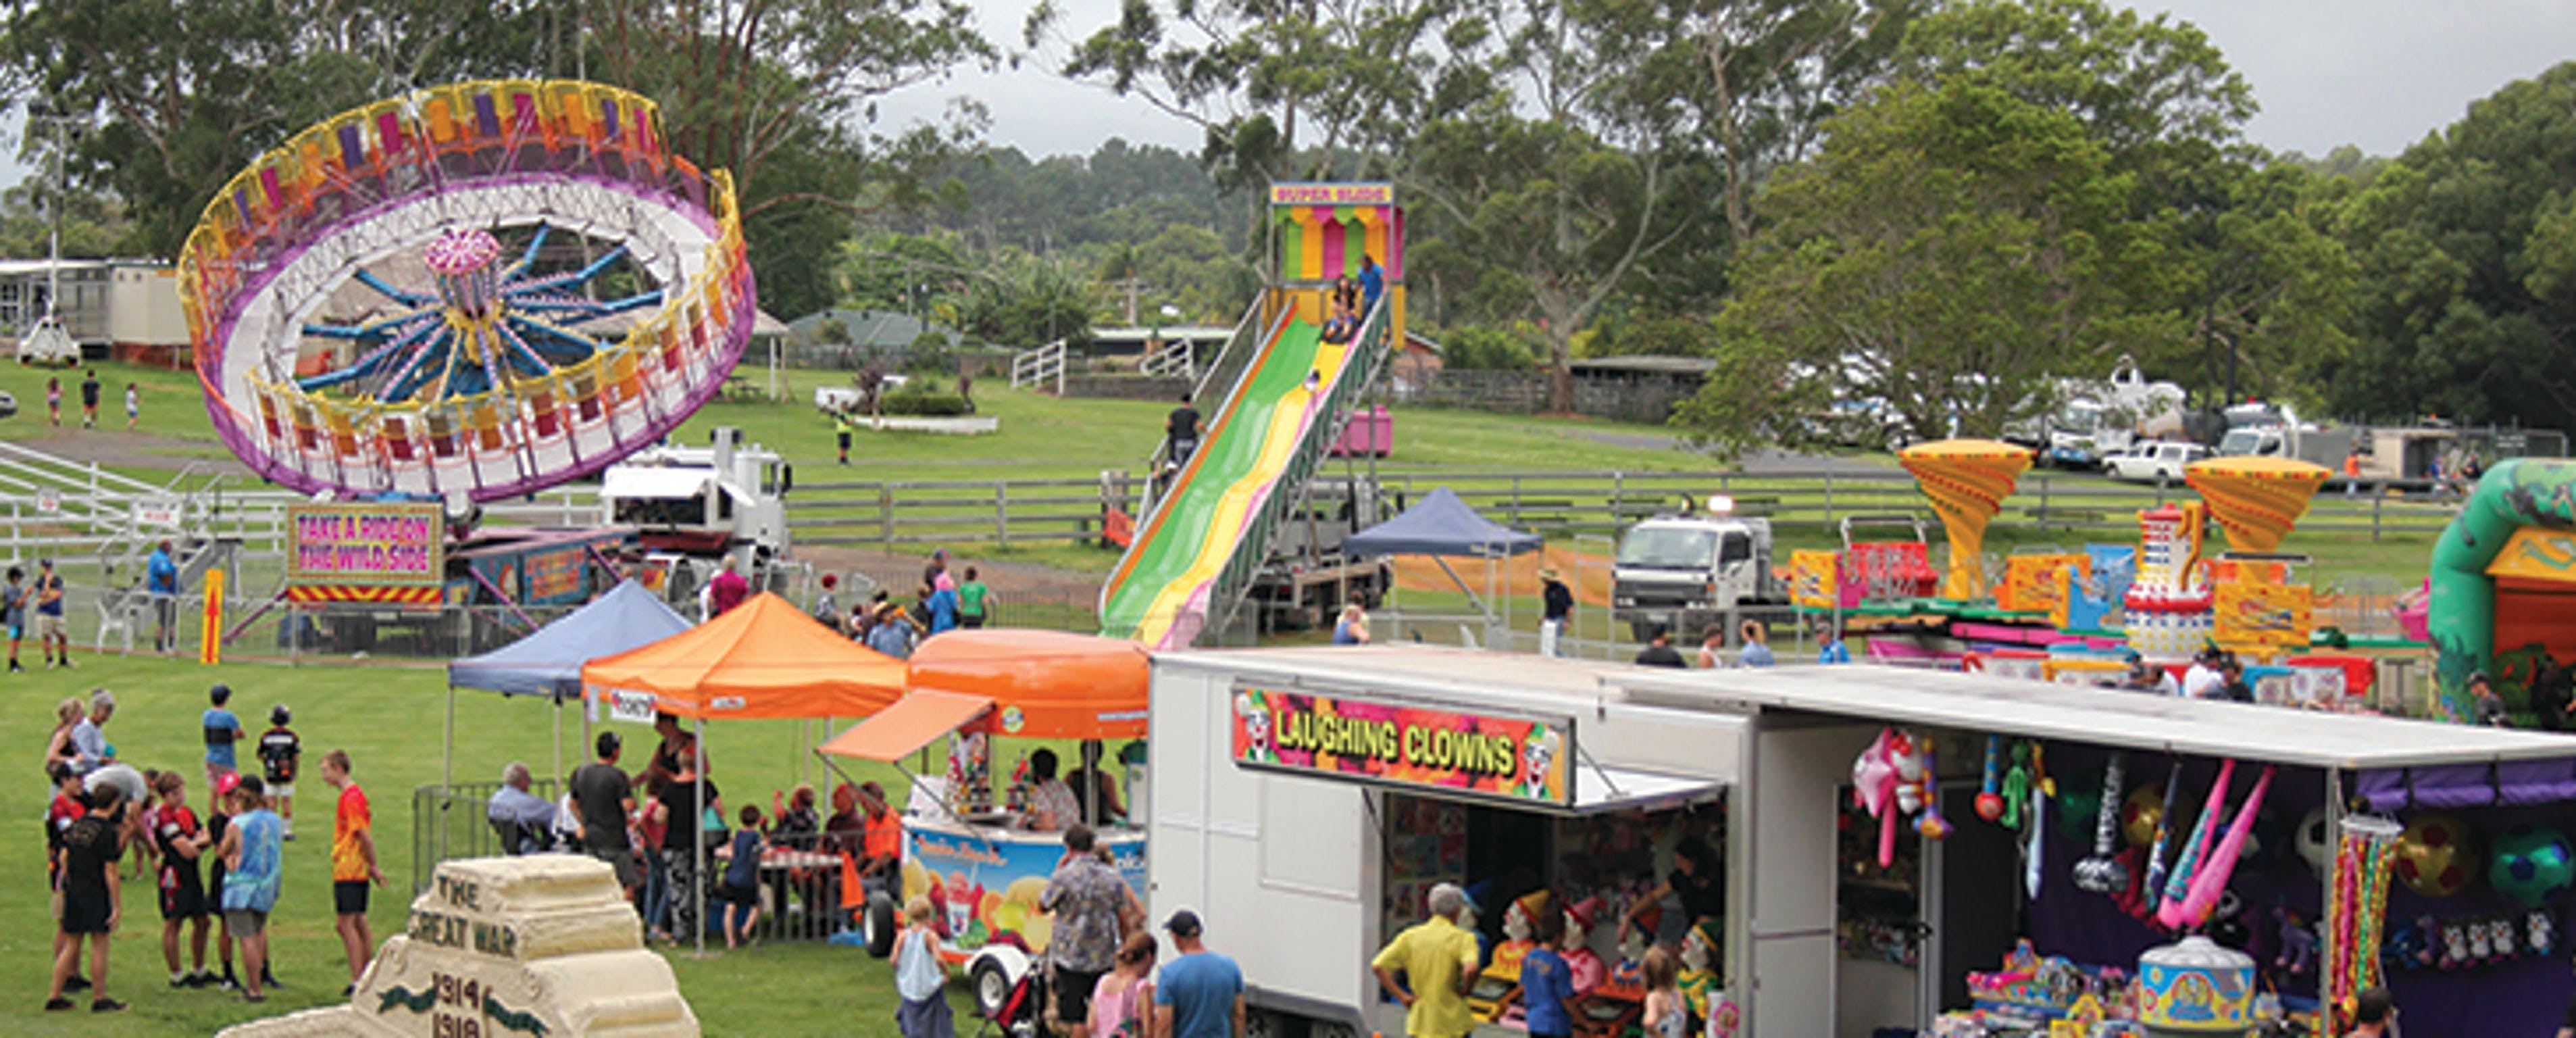 Alstonville Agricultural Society Show - WA Accommodation